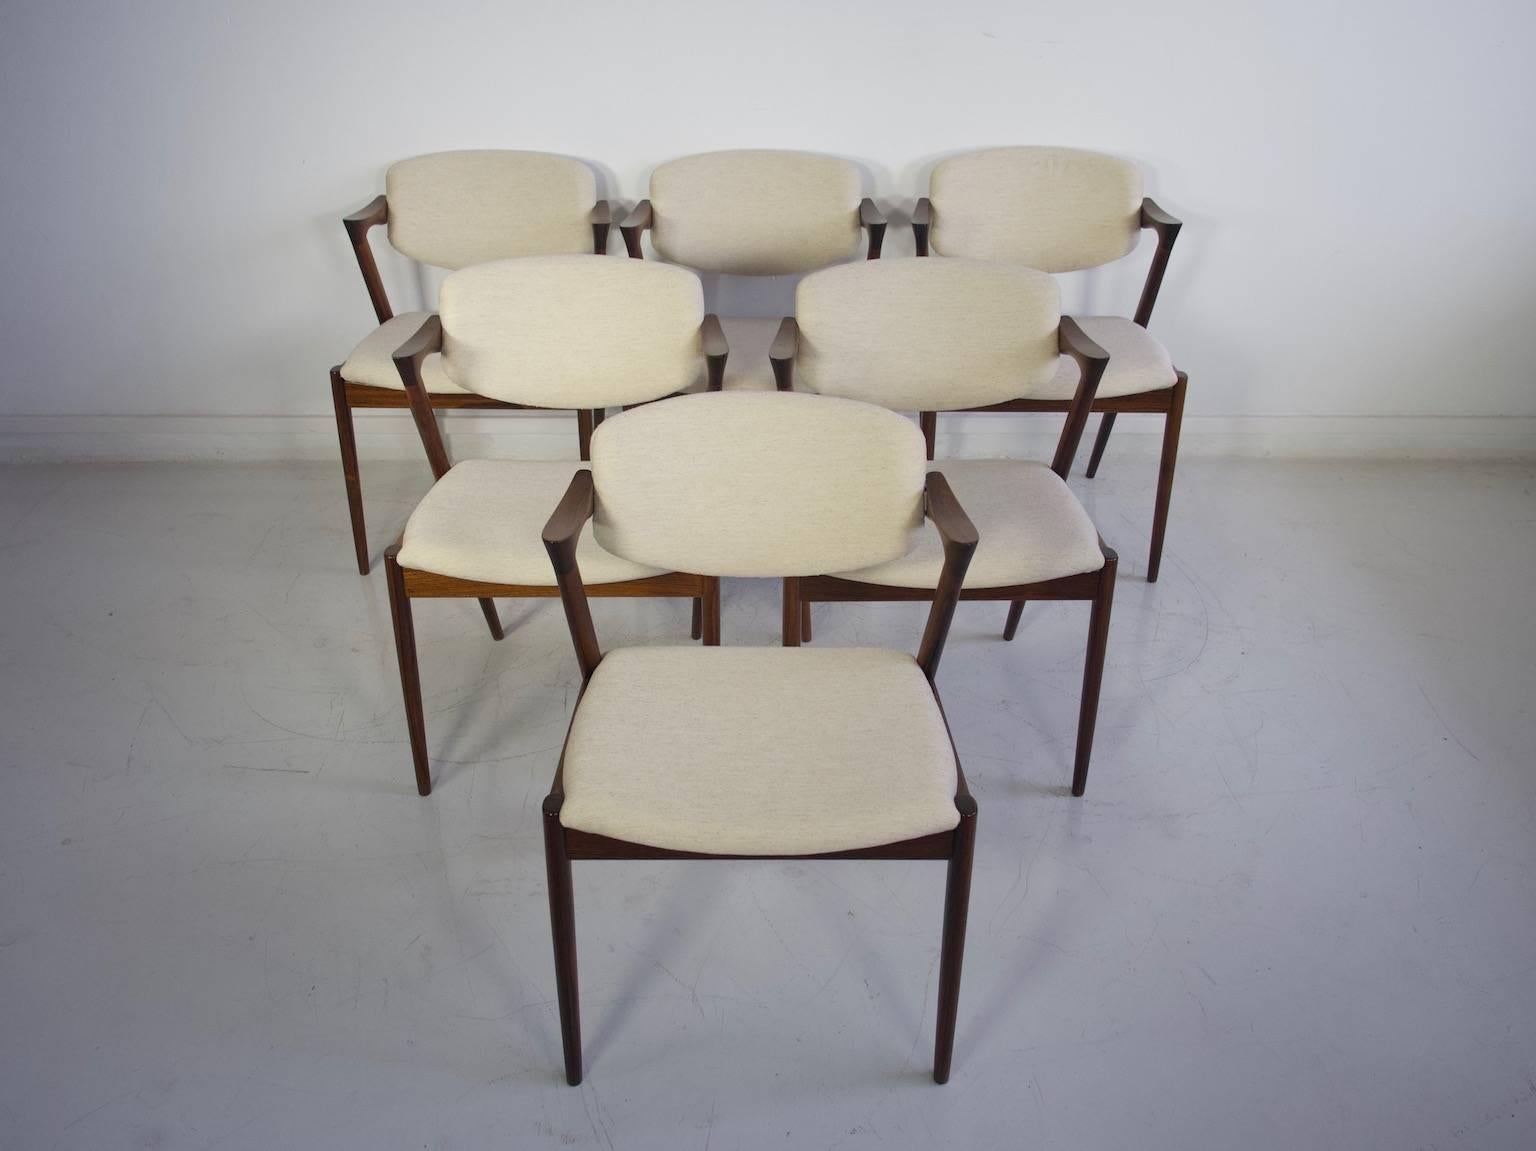 Six armchairs, model 42, designed by Kai Kristiansen. Rosewood frame, back with tilt function. Recently reupholstered with light color fabric. Designed in 1956-1957. Manufactured by Schou Andersen Møbelfabrik. At close inspection, a few chairs have